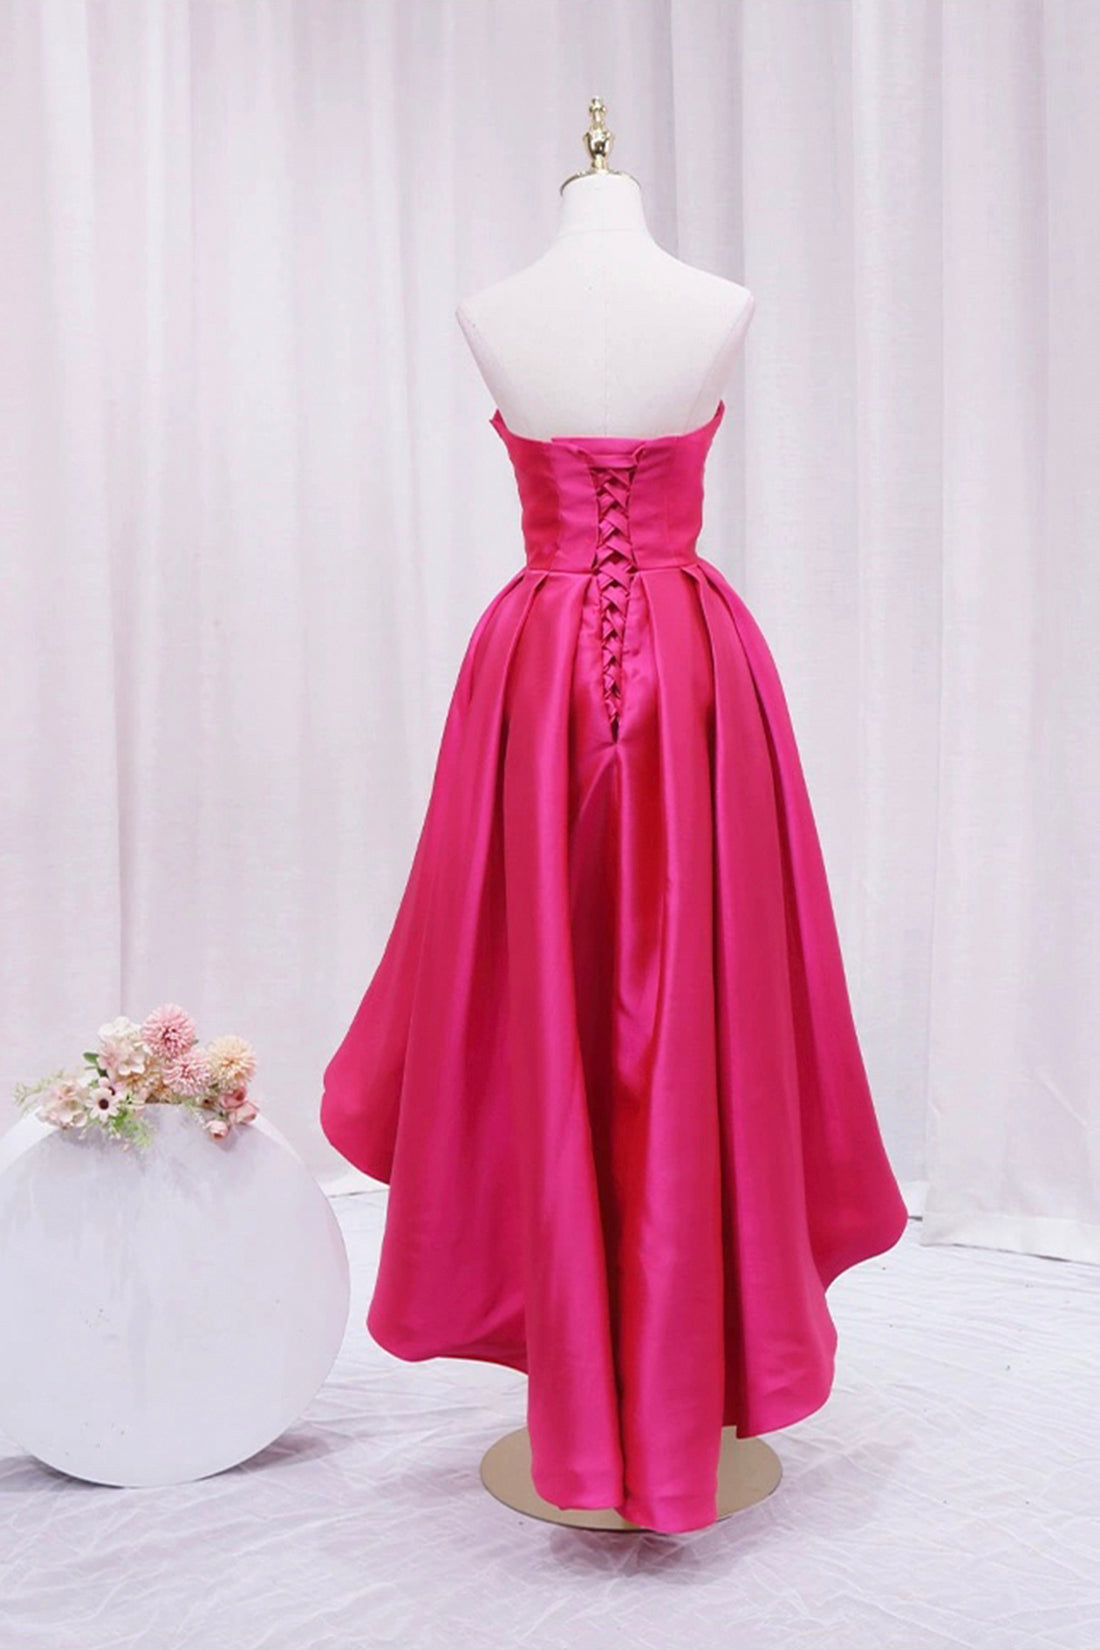 Party Dress Ball, Hot Pink Satin High Low Prom Dress, Cute Sweetheart Neck Evening Party Dress